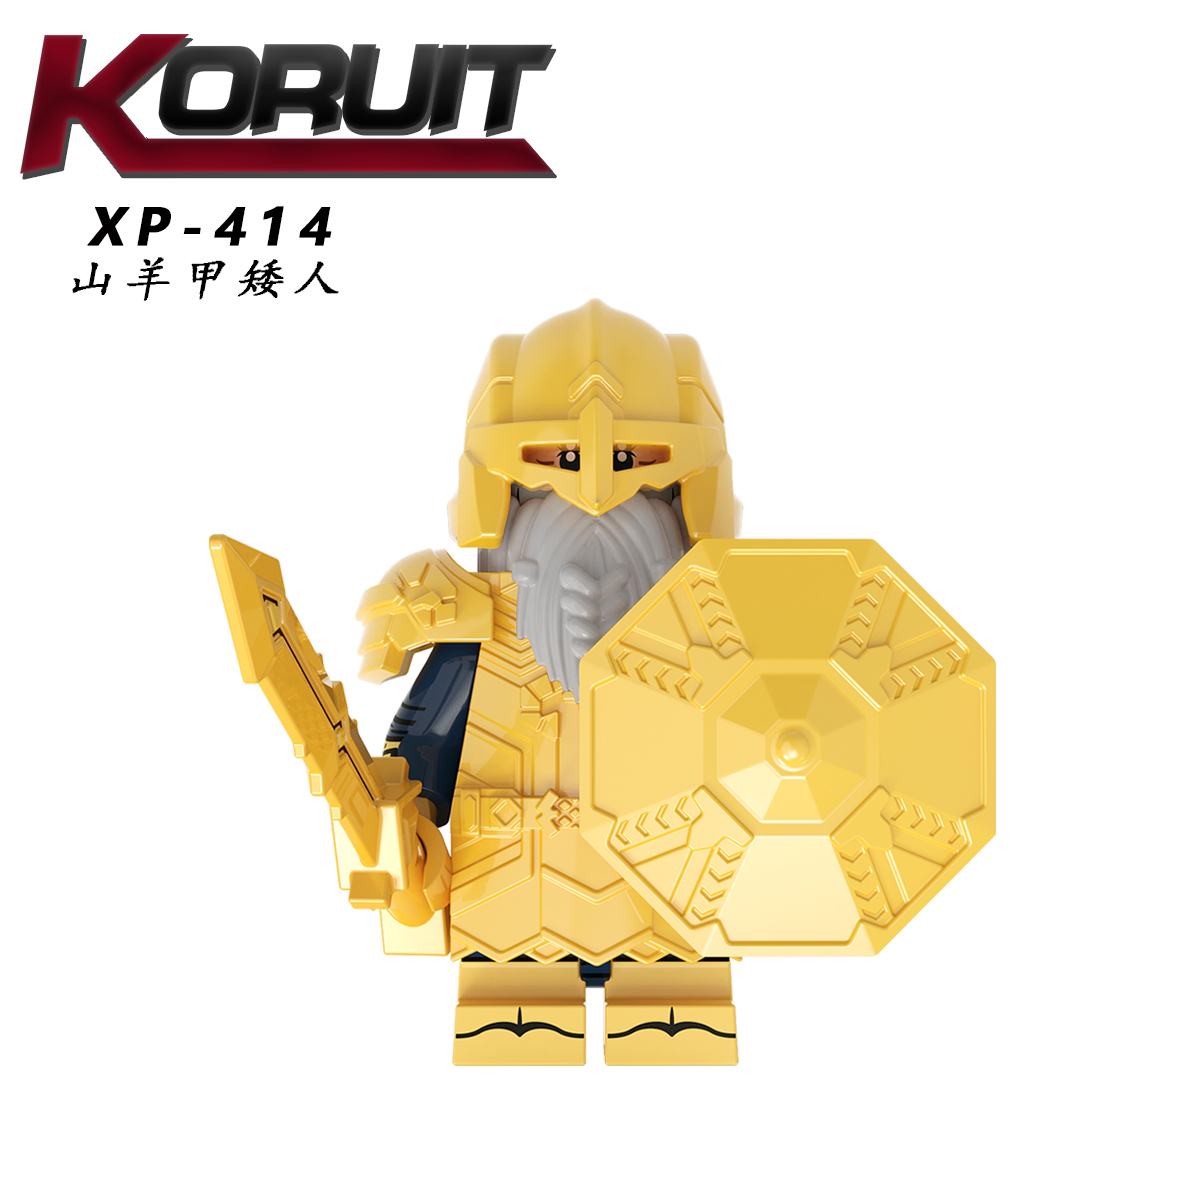 XP411 XP412 XP413 XP414 XP415 XP416 XP417 XP418 KT1054 Lord Of Rings Movie Series Characters Bricks Building Blocks Action Figures Educational Toys For Children's Gifts